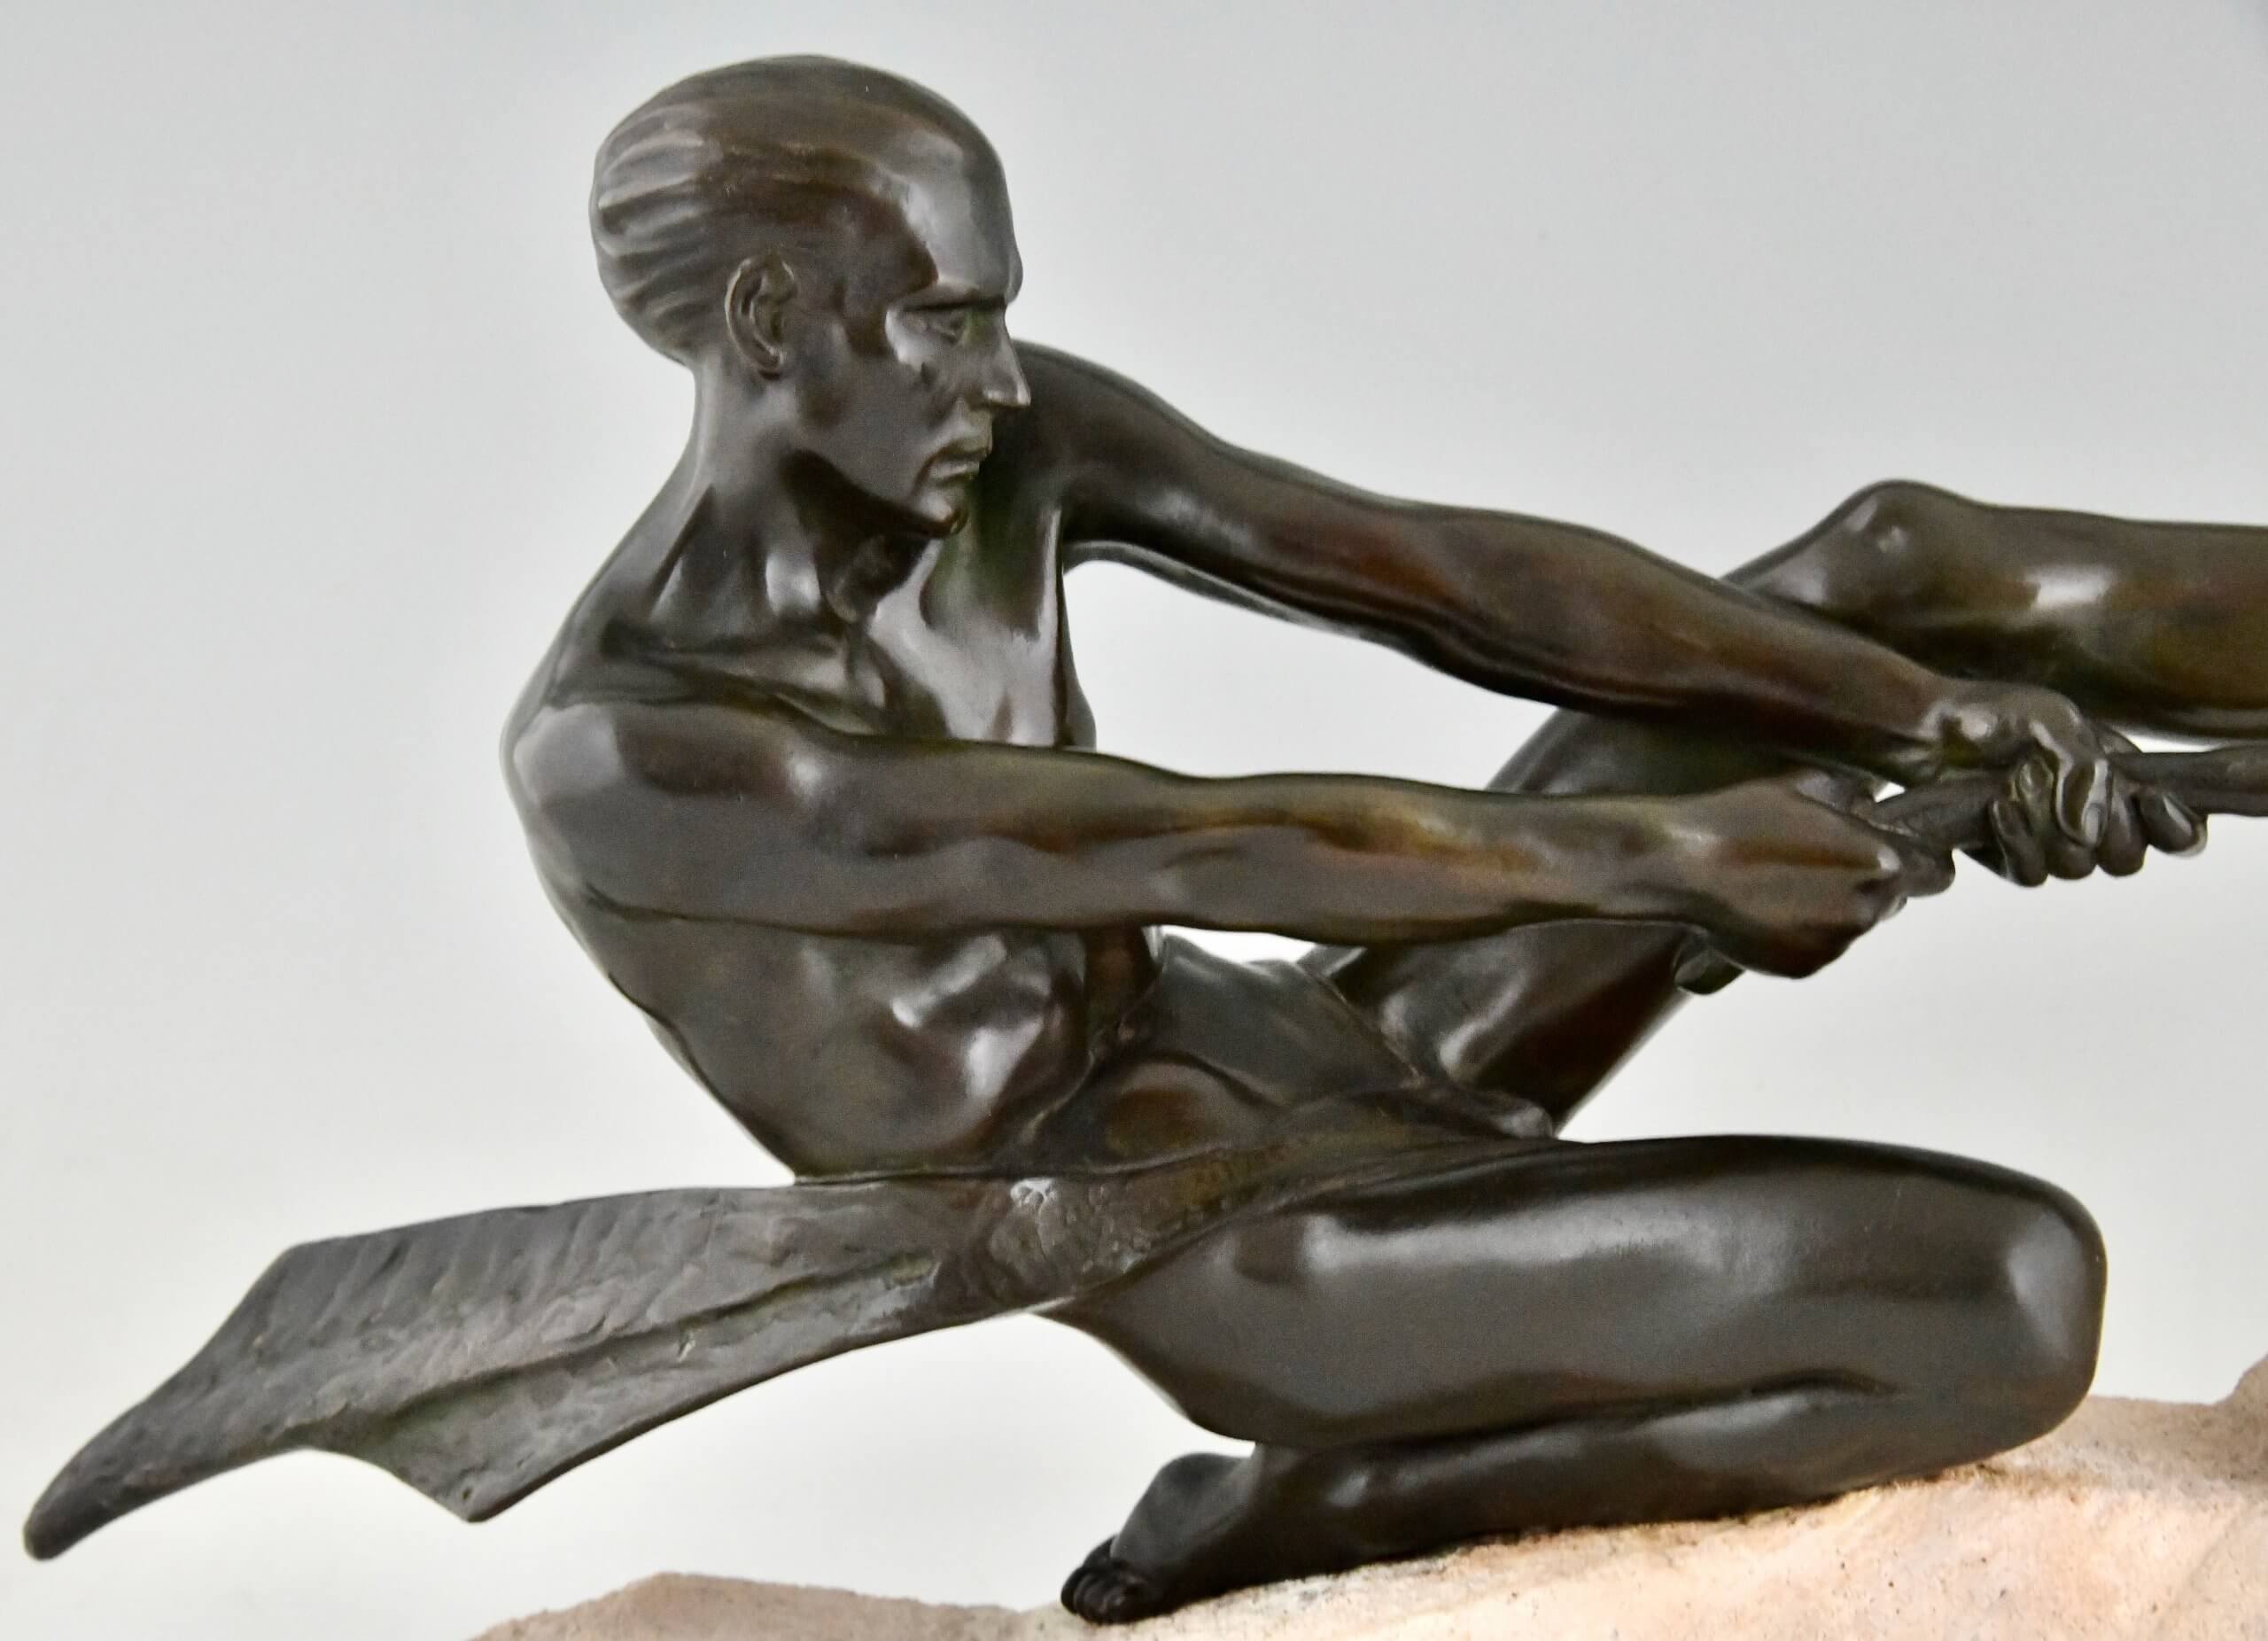 Art Deco sculpture athlete with rope.